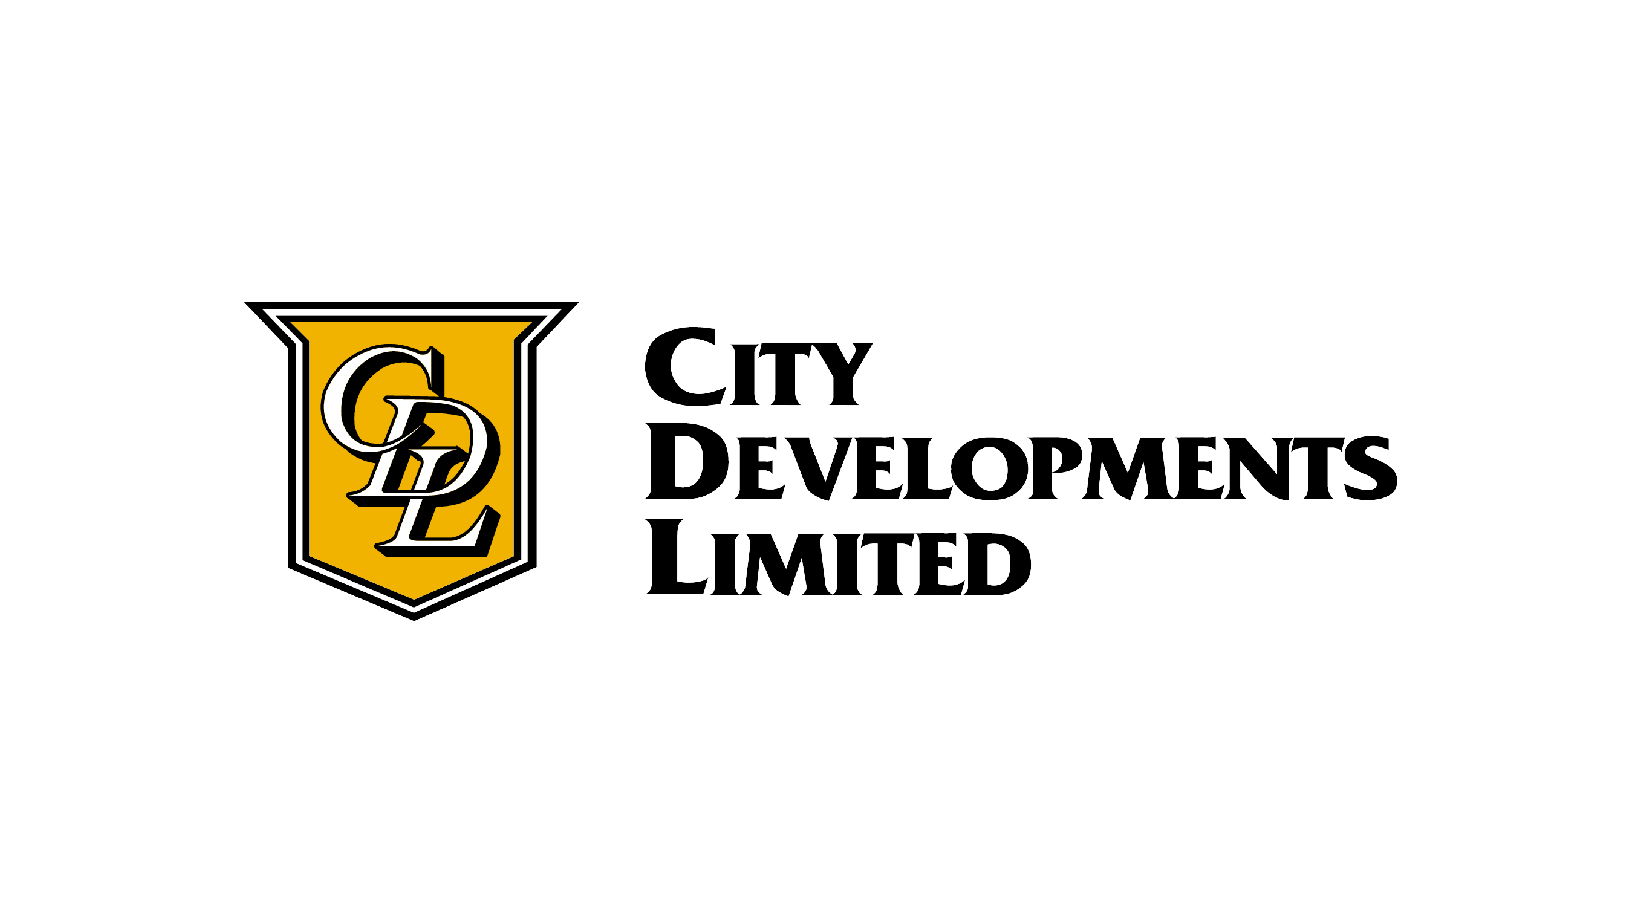 City Developments Limited acquires Yardhouse site